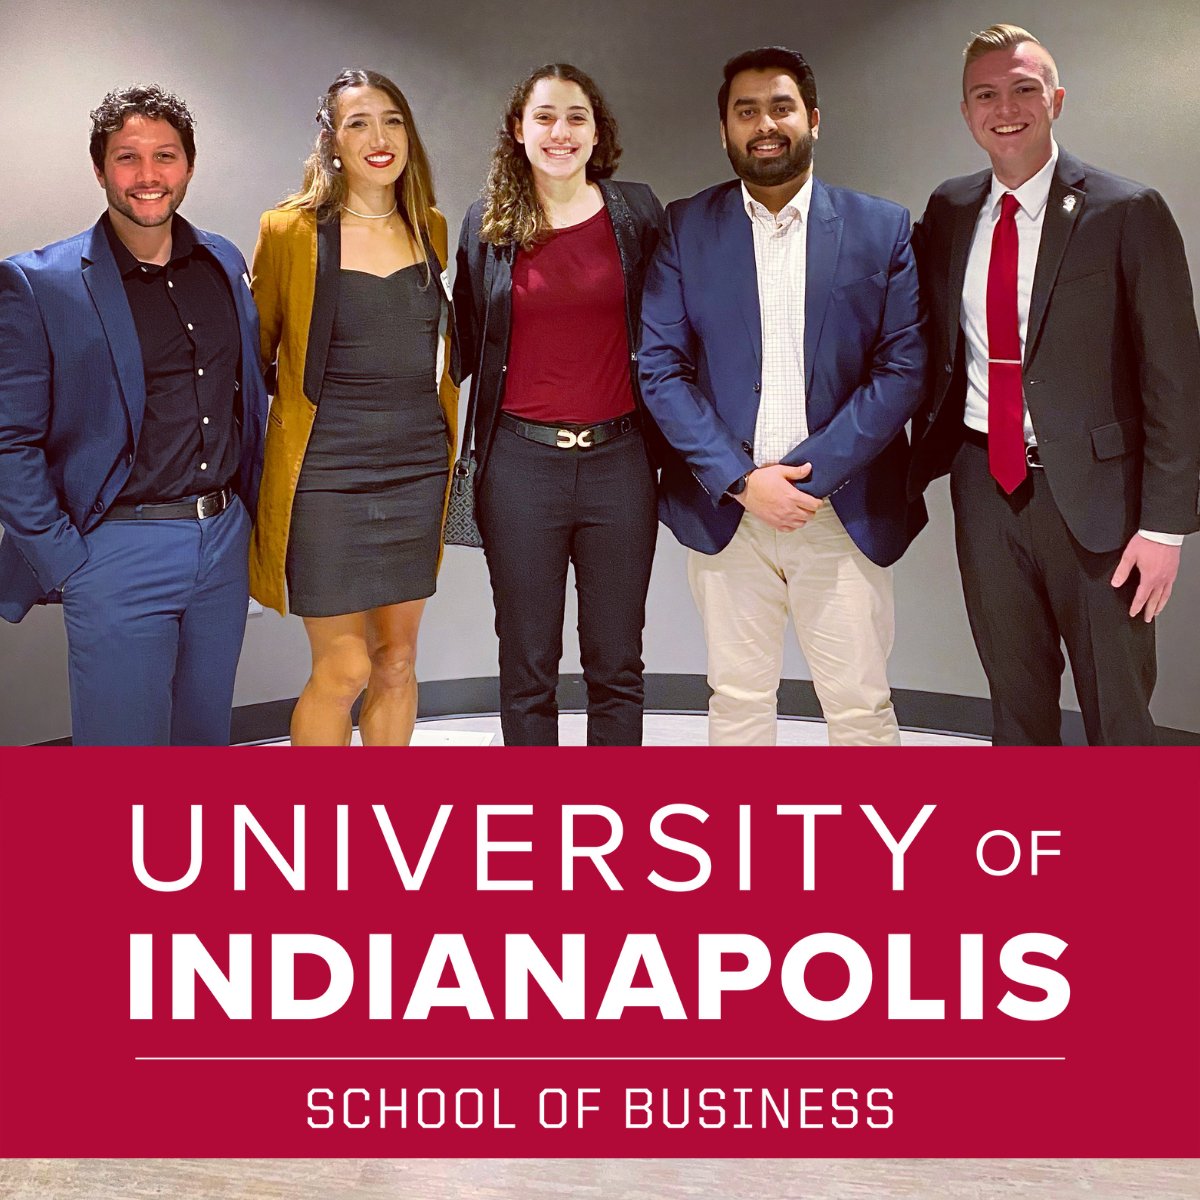 Our one-year #MBA program at @uindy is an intensive, applied program that jumpstarts any #business #career. 

Just ask these happy #gradstudents. 

uindy.edu/business/mba/1…

#uindy #graduateschool #graduatedegree #growth